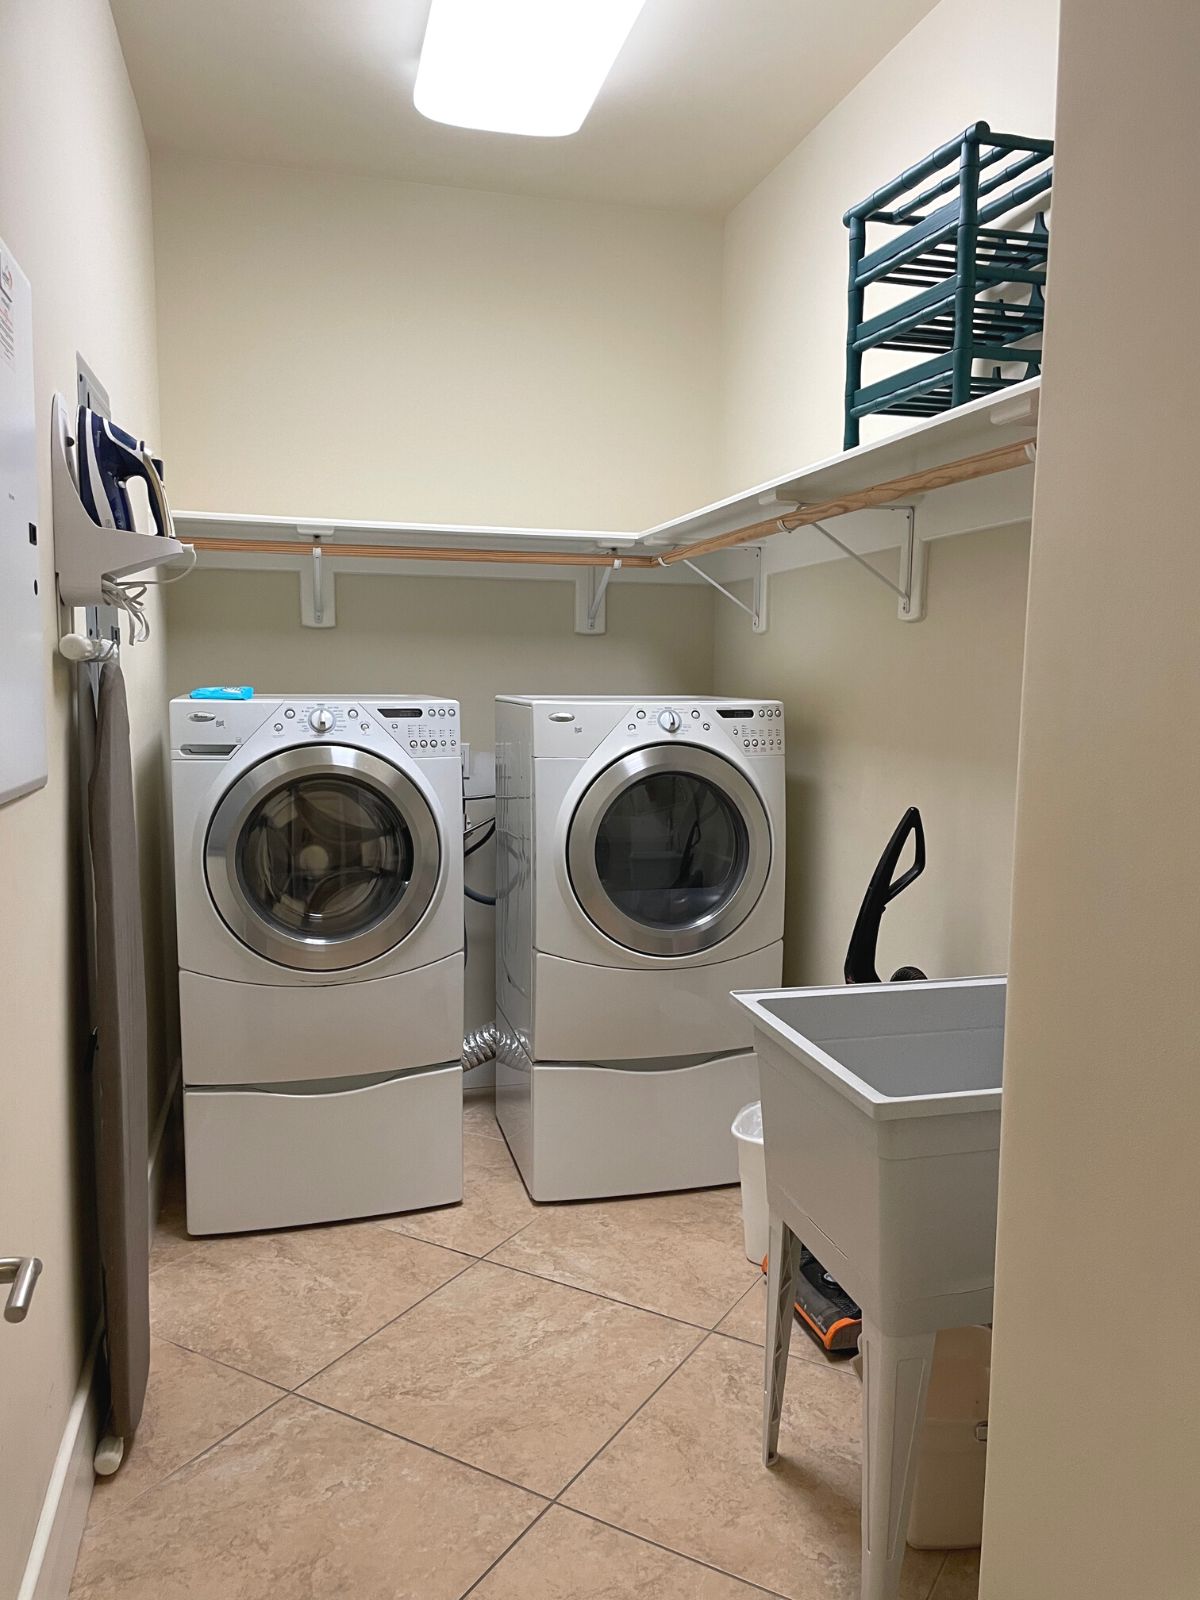 Laundry room in the units at Turquoise place with washer, dryer, and sink.